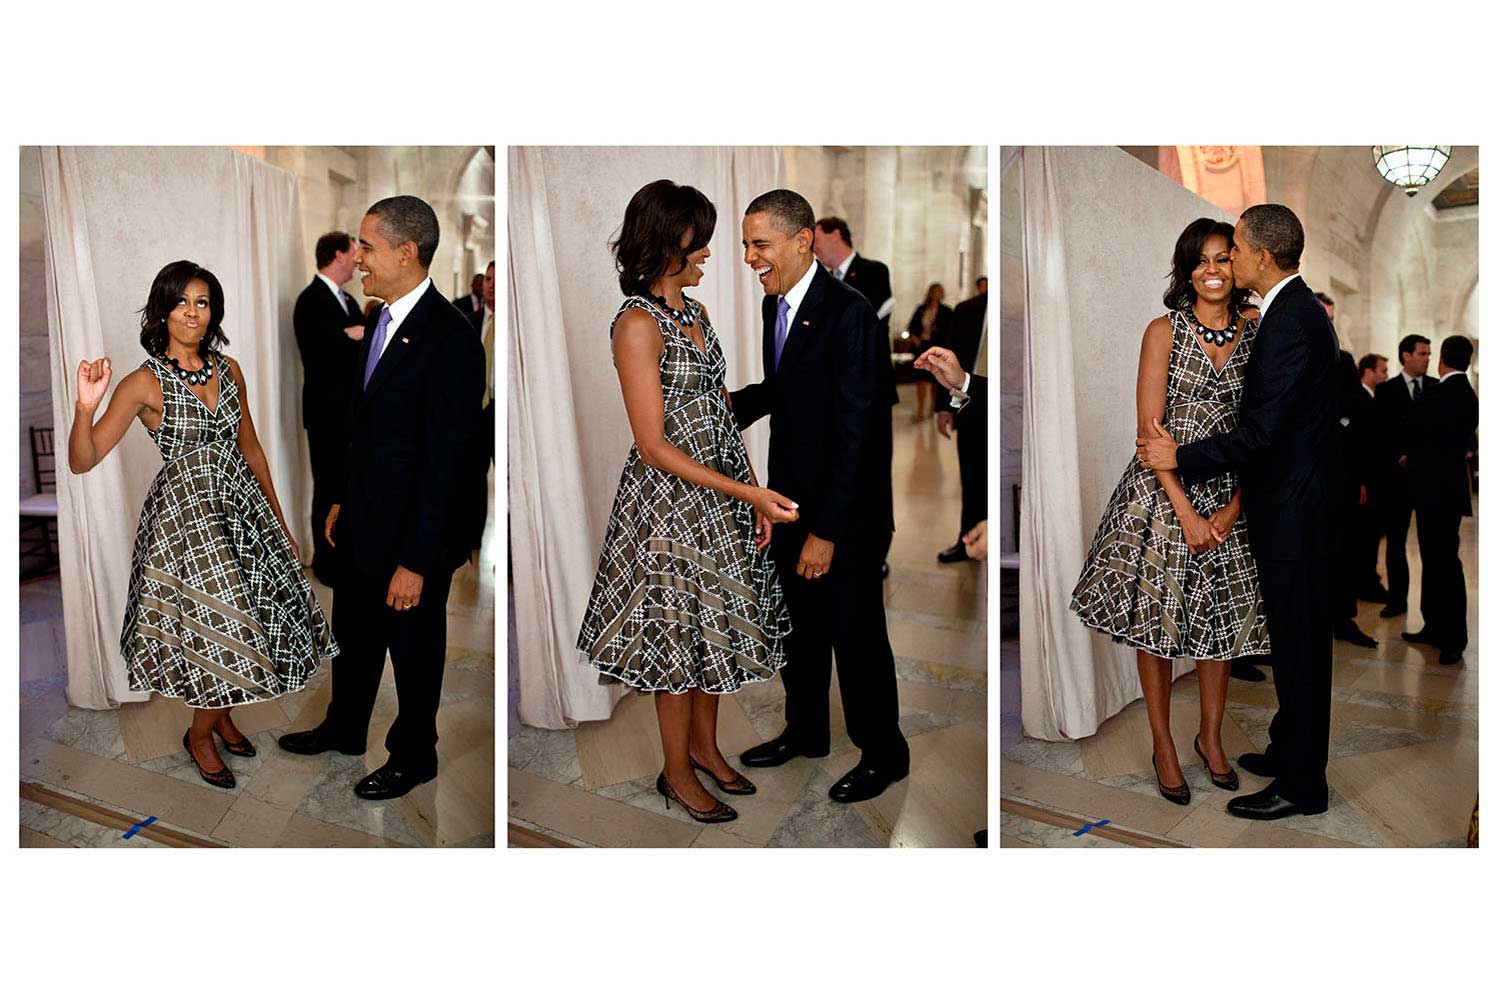 President Obama laughs as The First Lady pretends to be a majorette before addressing the United Nations General Assembly Reception at the New York Public Library, in N.Y., N.Y., Sept. 21, 2011. A marching band performed at the reception before the President and Mrs. Obama addressed the crowd.